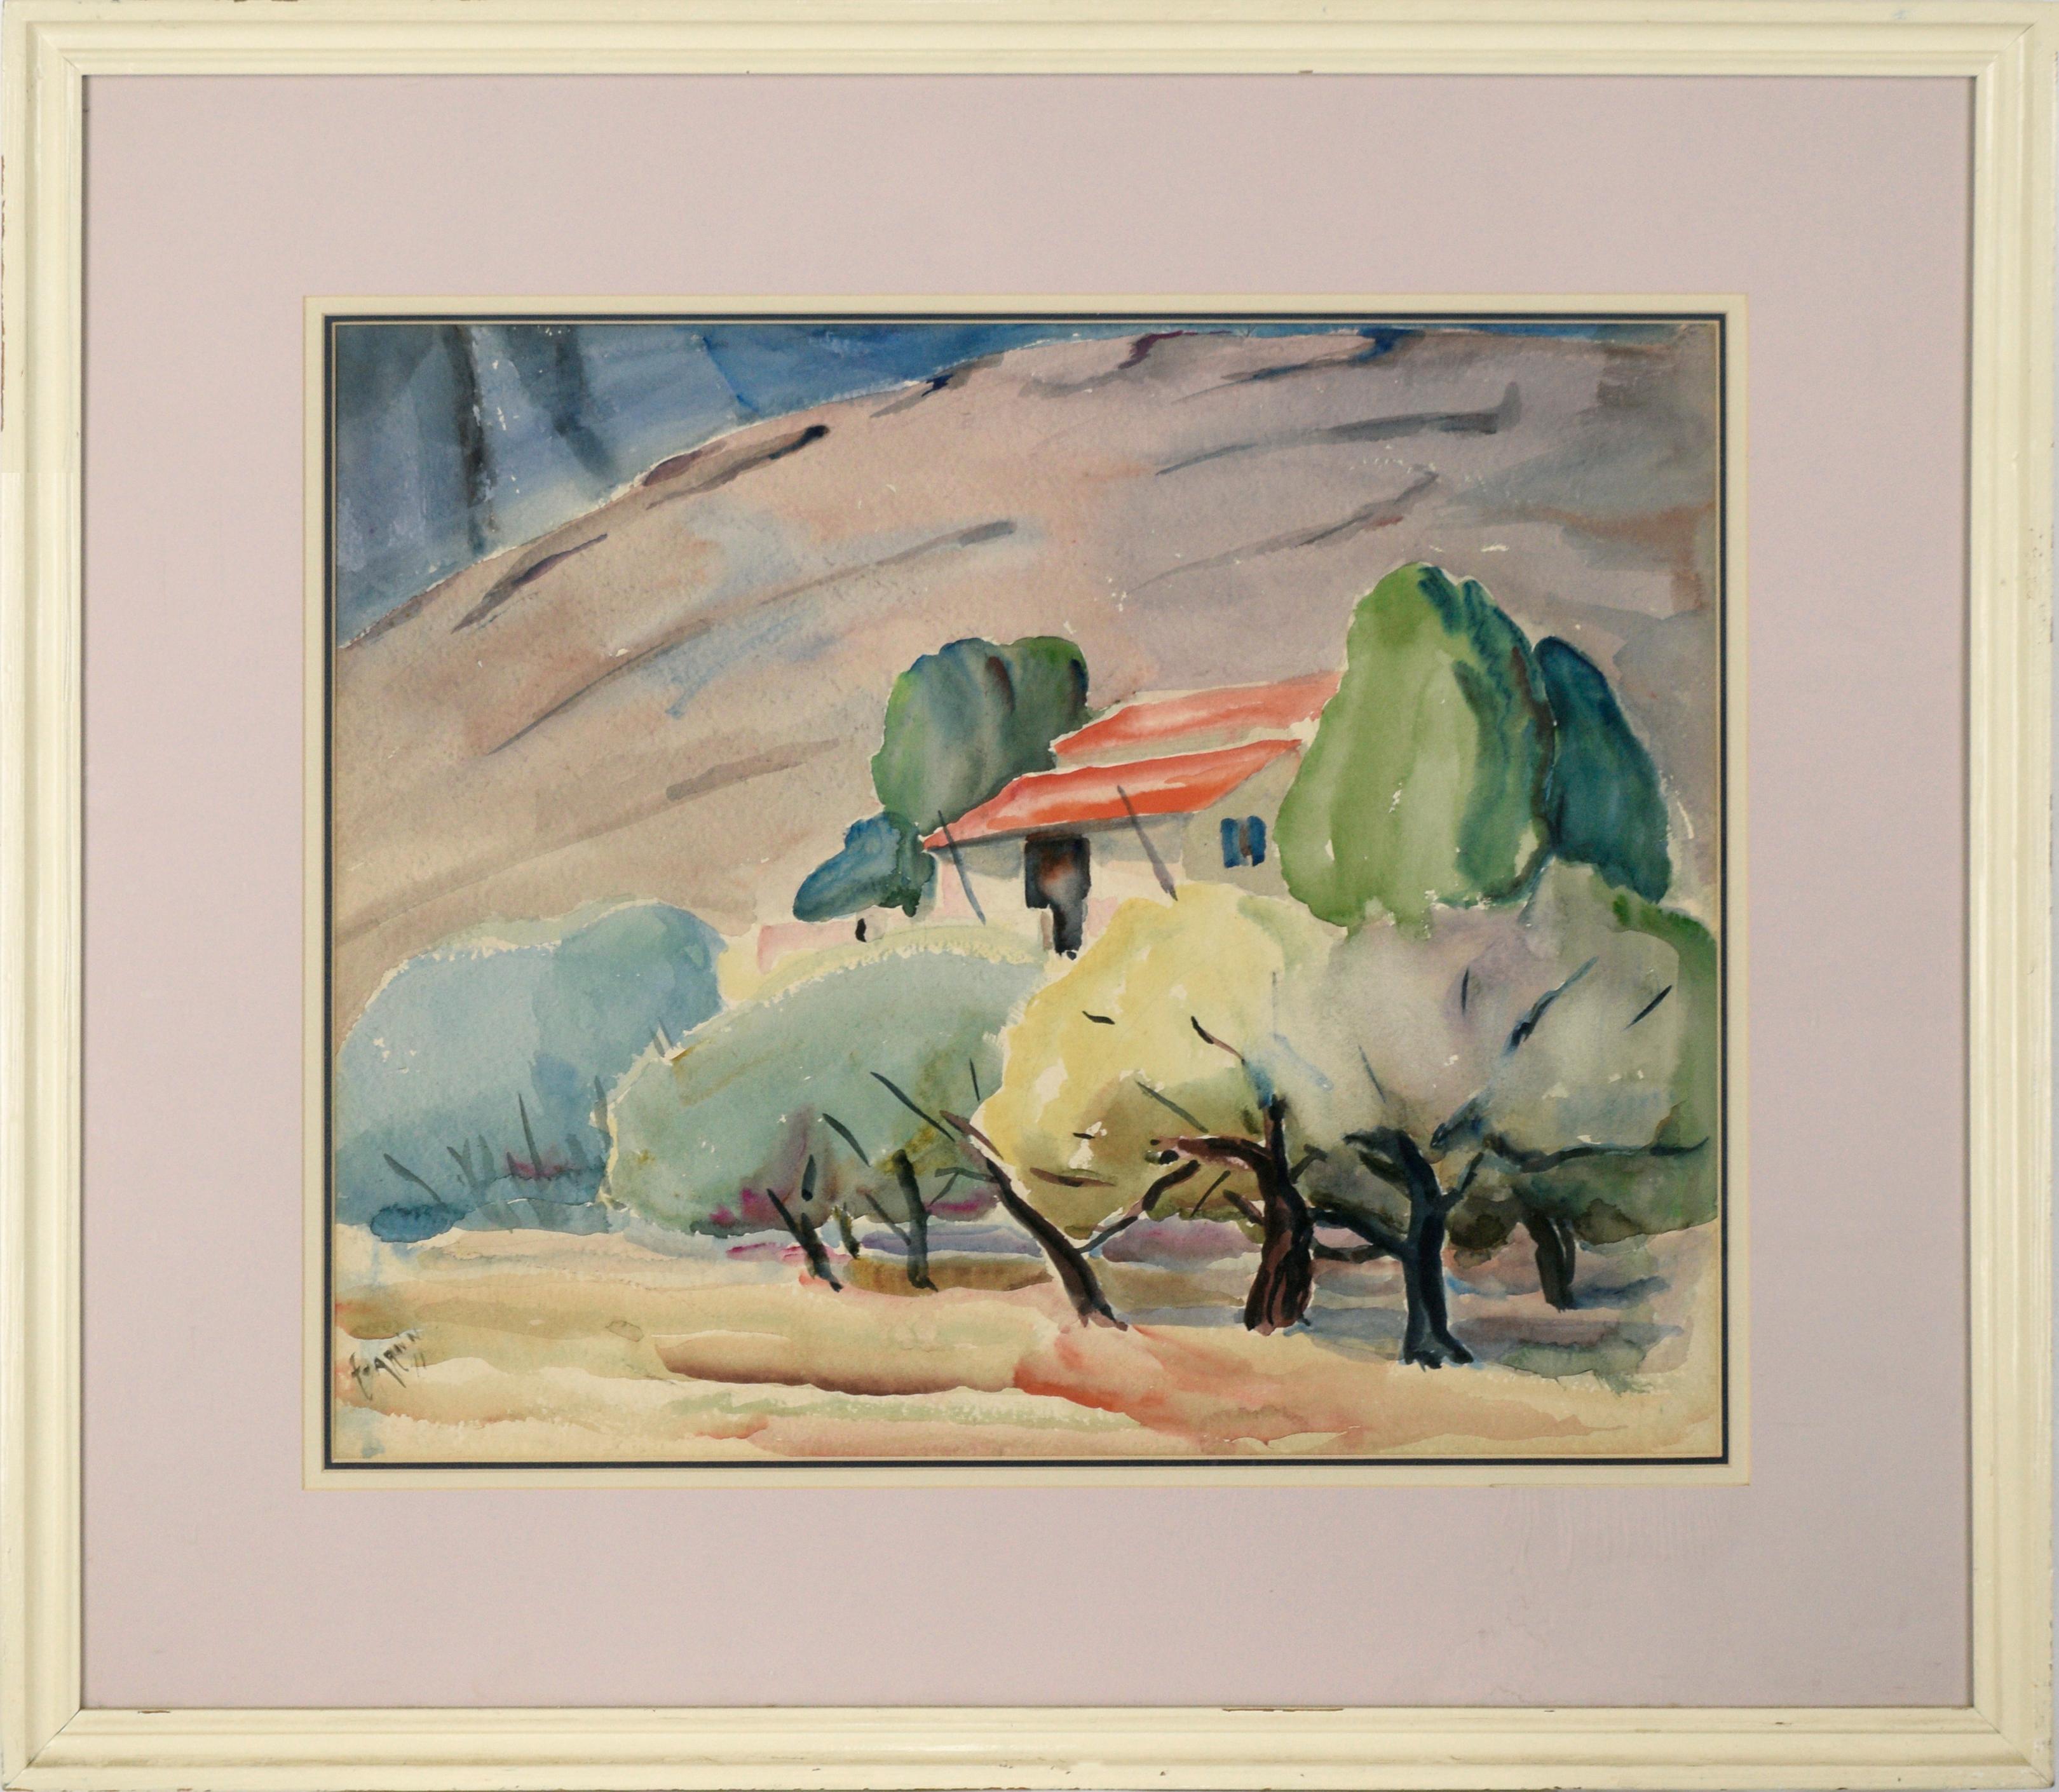 Emil Armin Landscape Art - House on the Hillside in the Trees - Watercolor on Paper